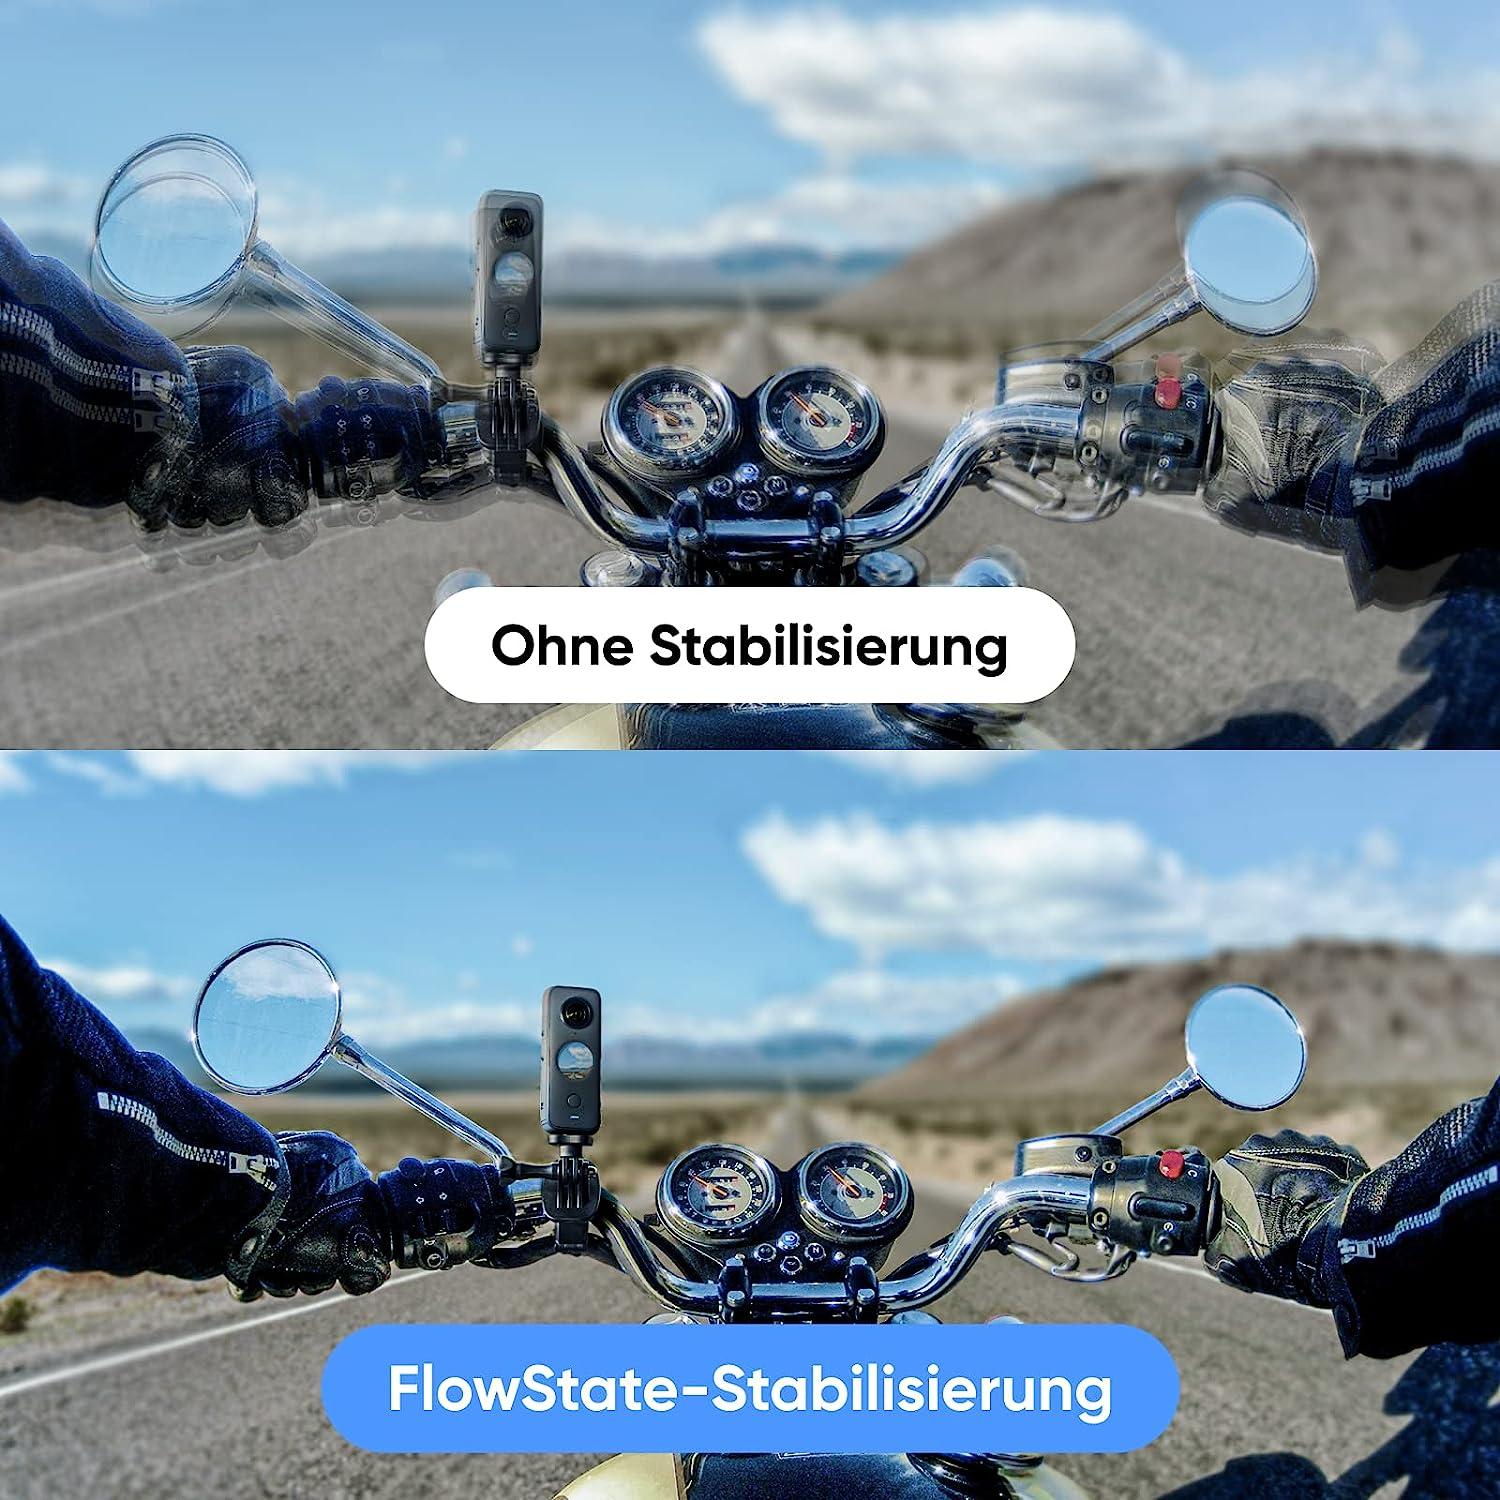 What is the FlowState stabilization feature on the Insta360 One X2?